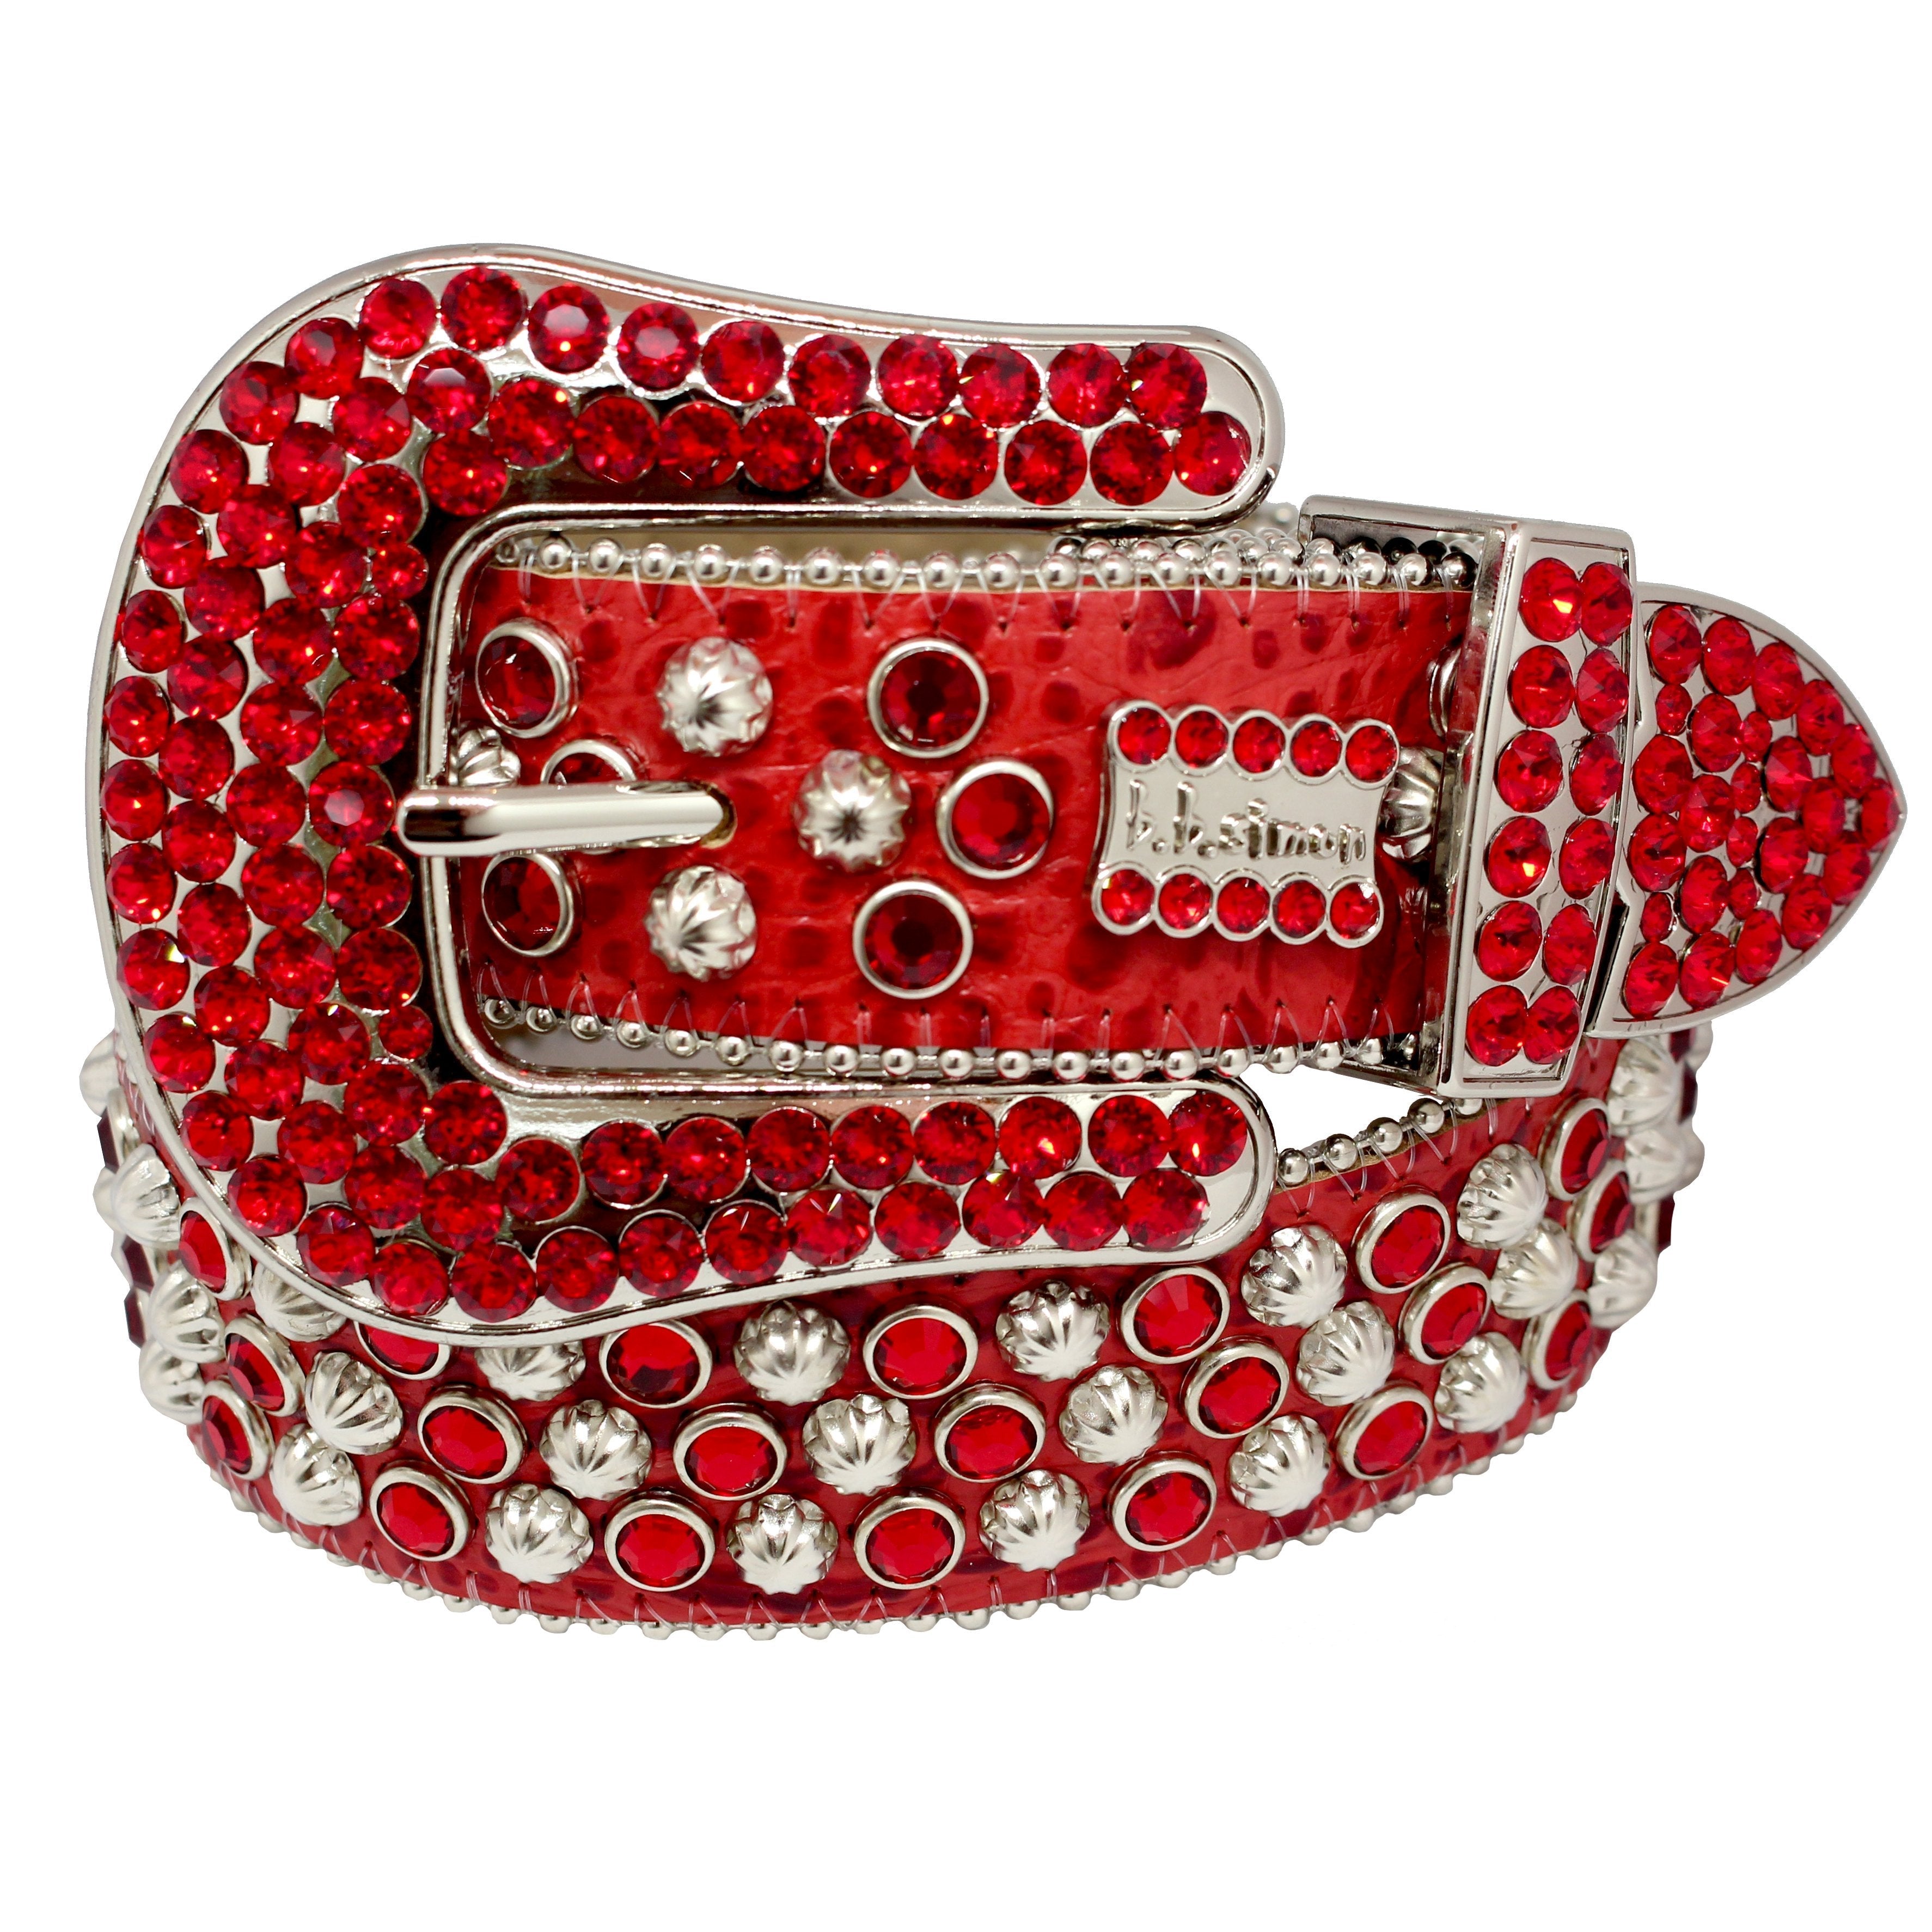 B.B. Simon Red Belt with Silver Parachutes and Red Crystals 34 / Red/Silver